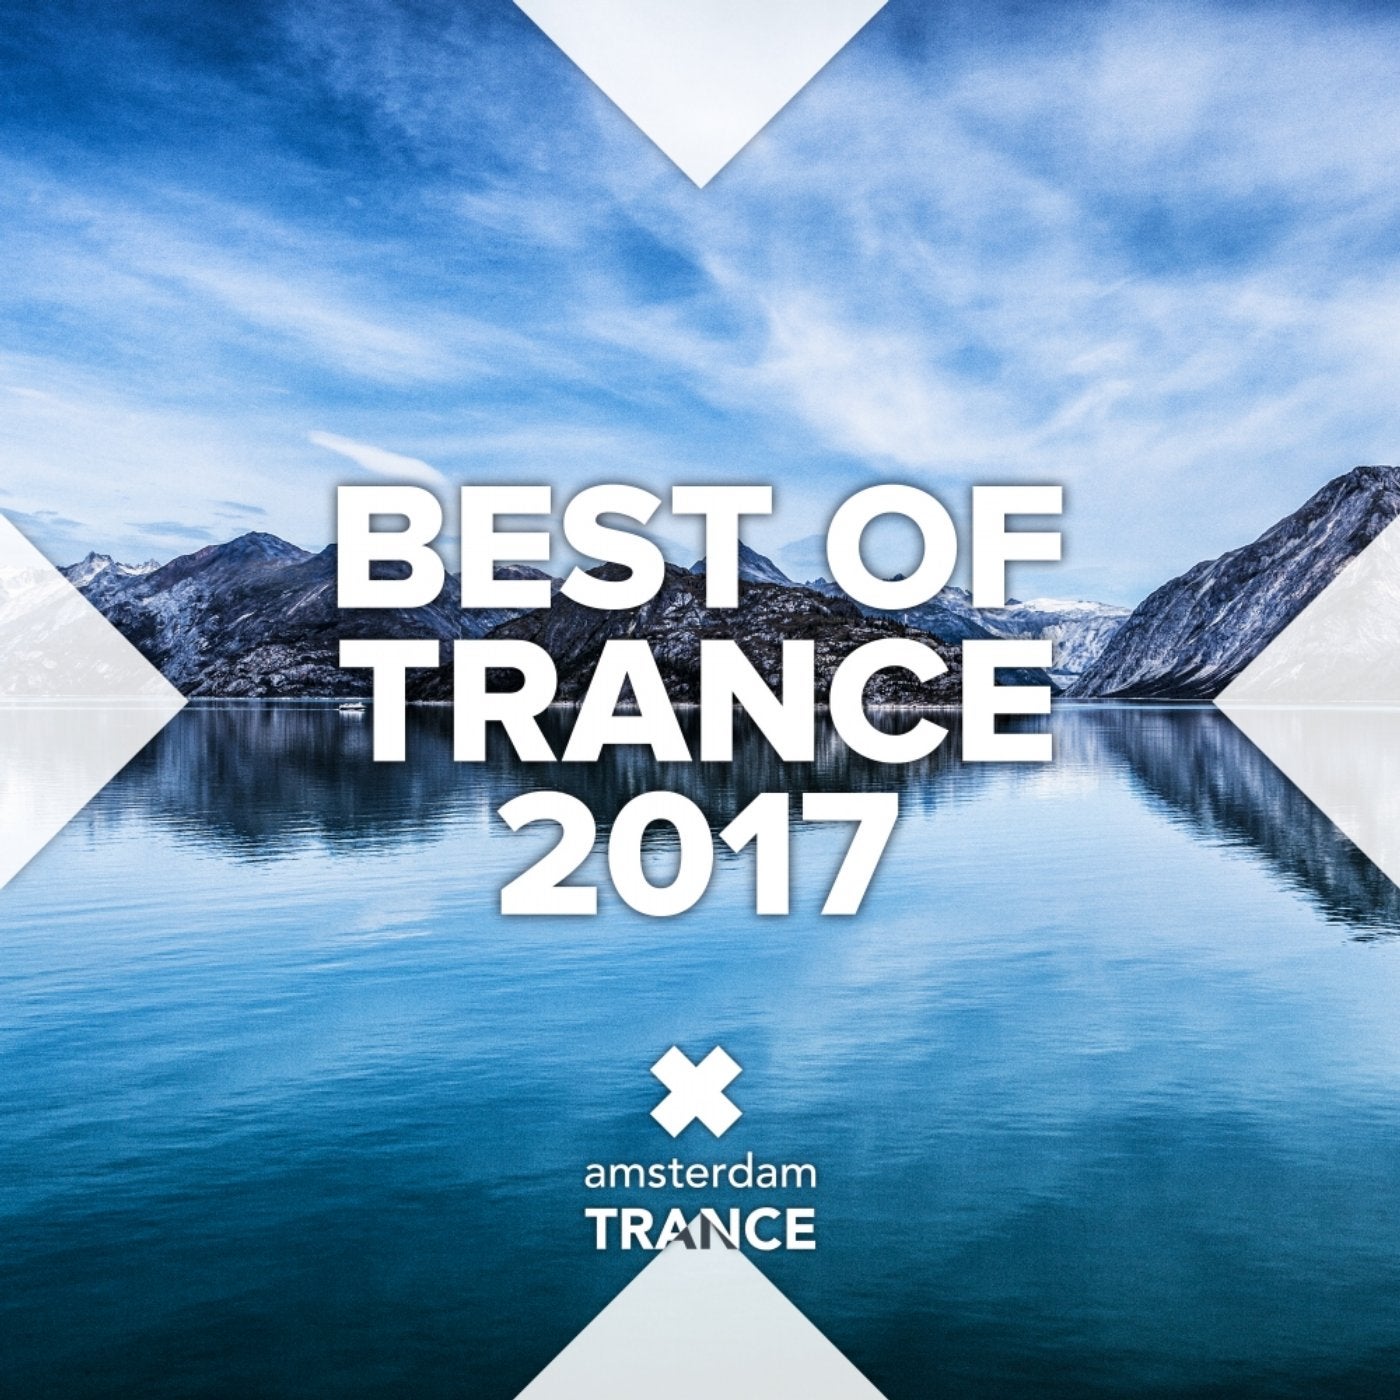 Best of Trance 2017